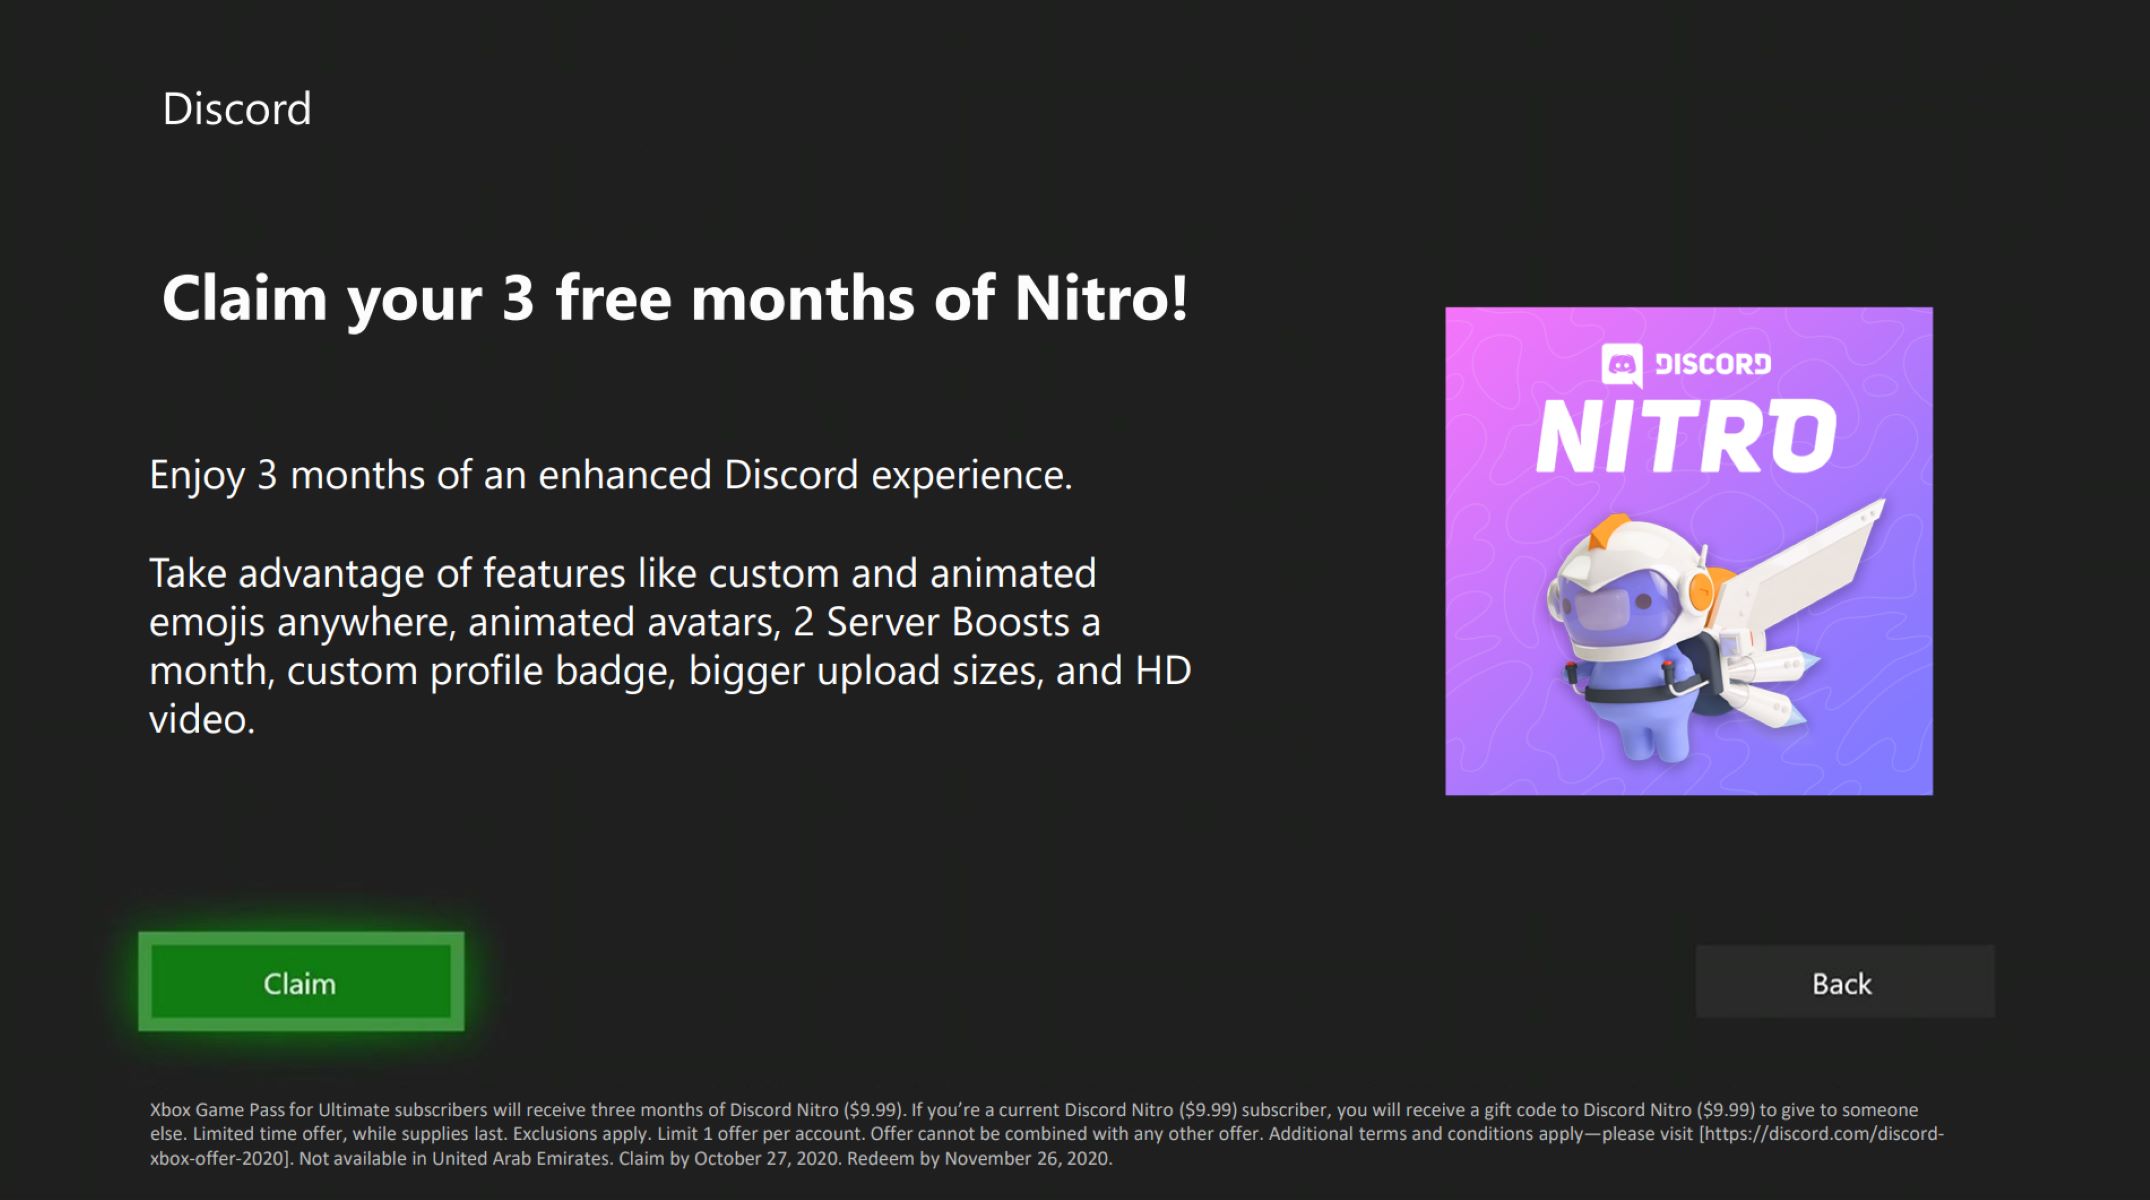 Discord Launches a $3 per Month 'Nitro Basic' Subscription